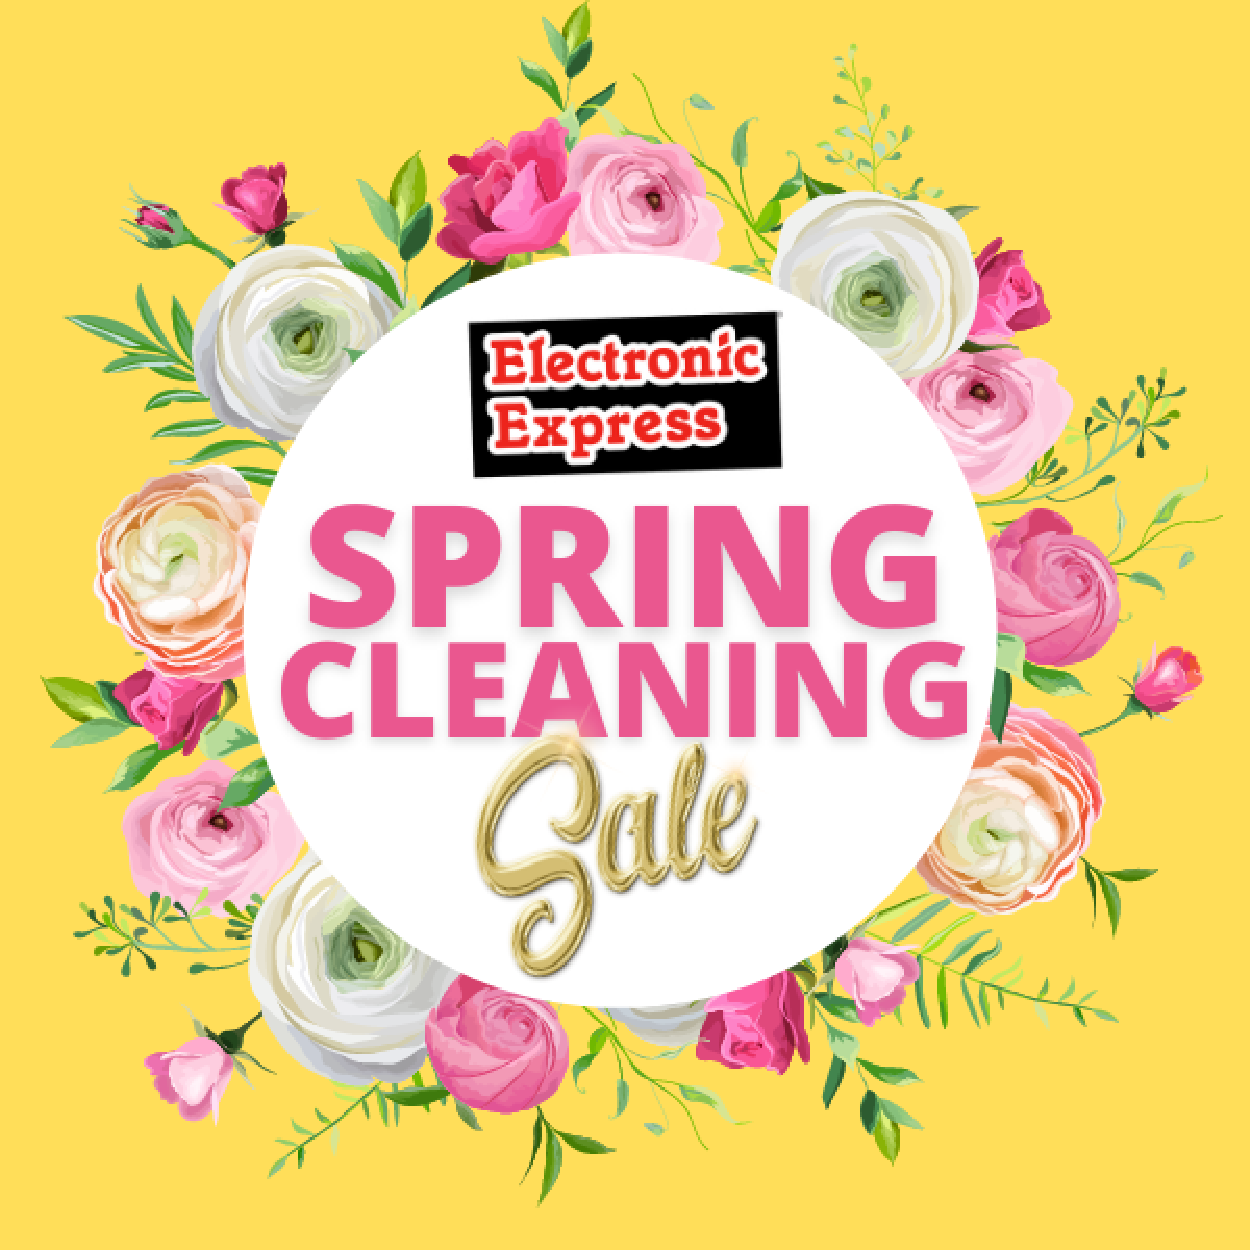 Spring cleaning sale- save big on robot vacuums and more!